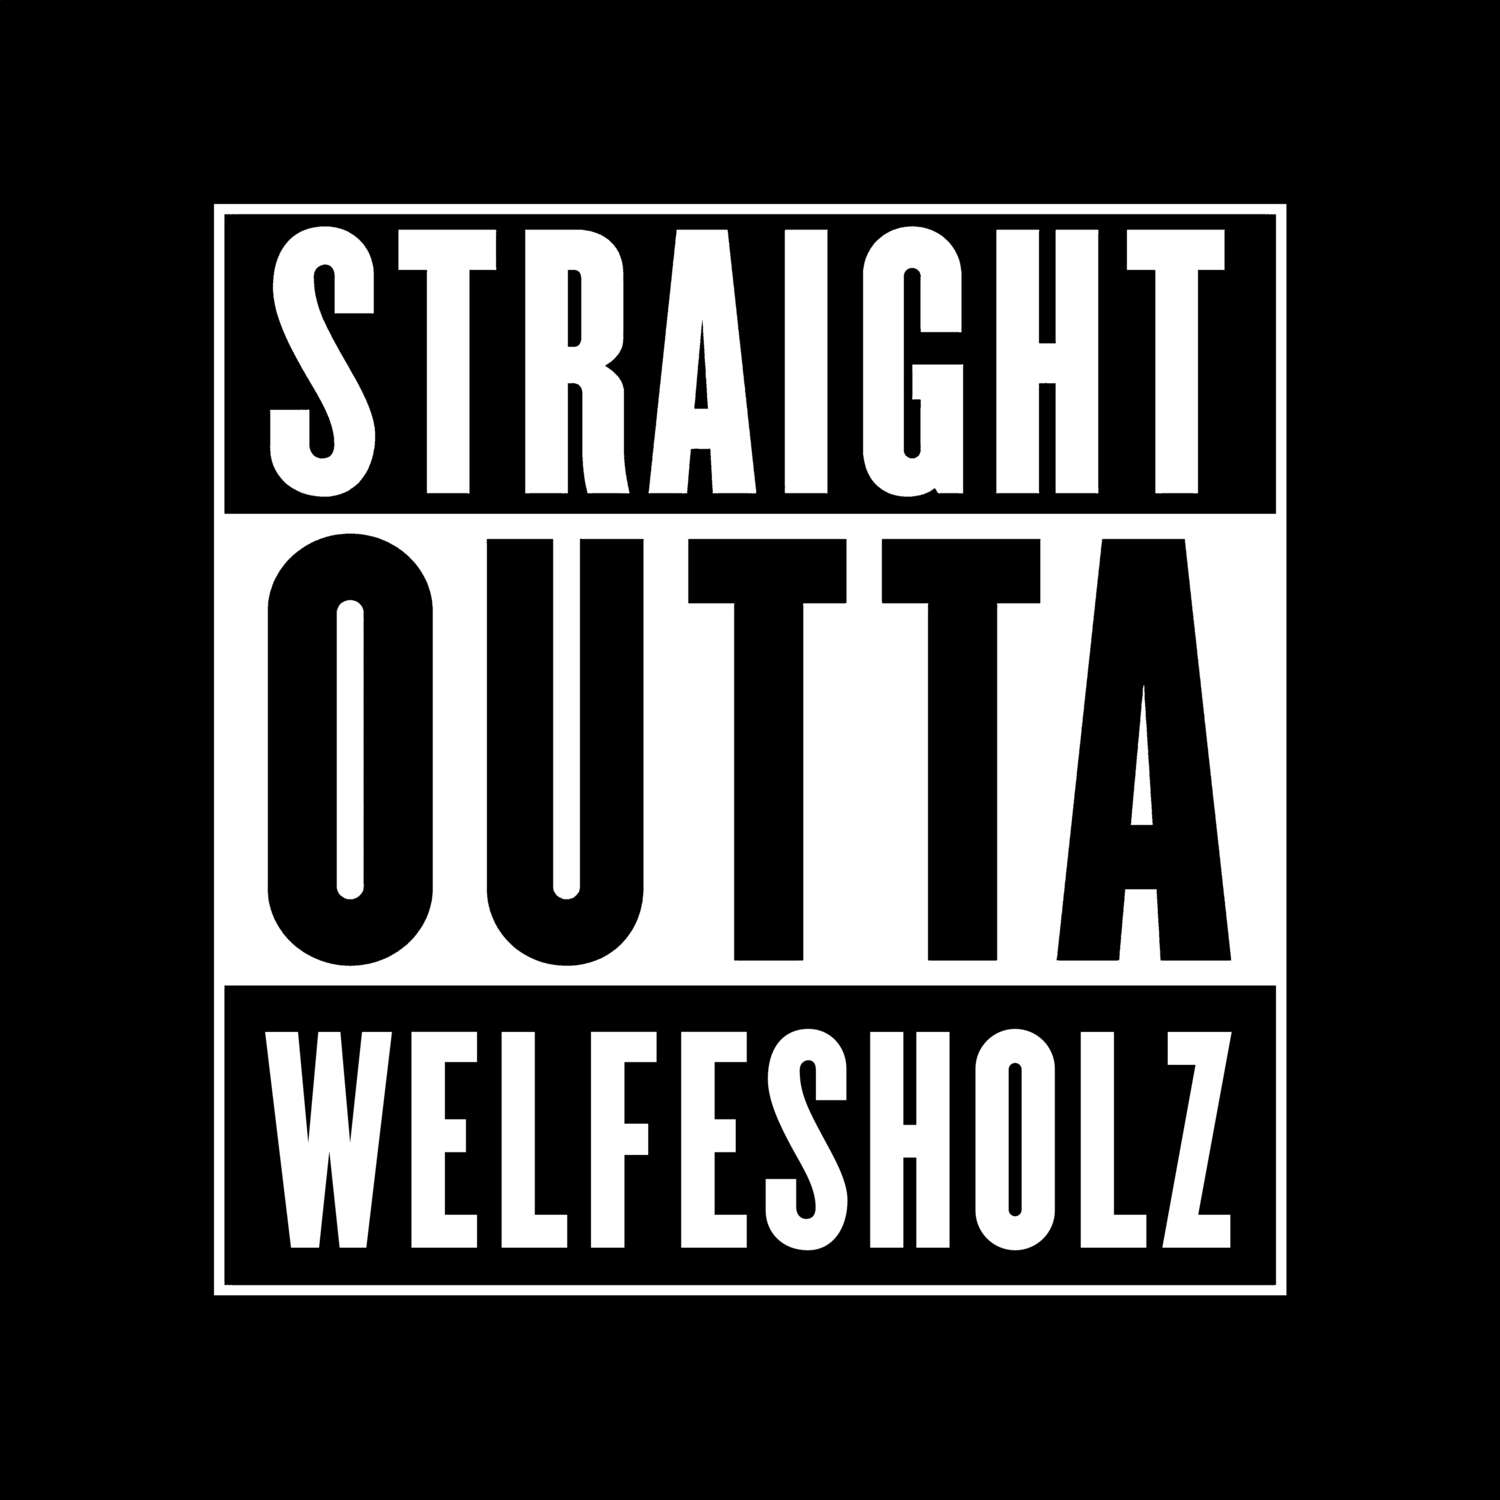 Welfesholz T-Shirt »Straight Outta«